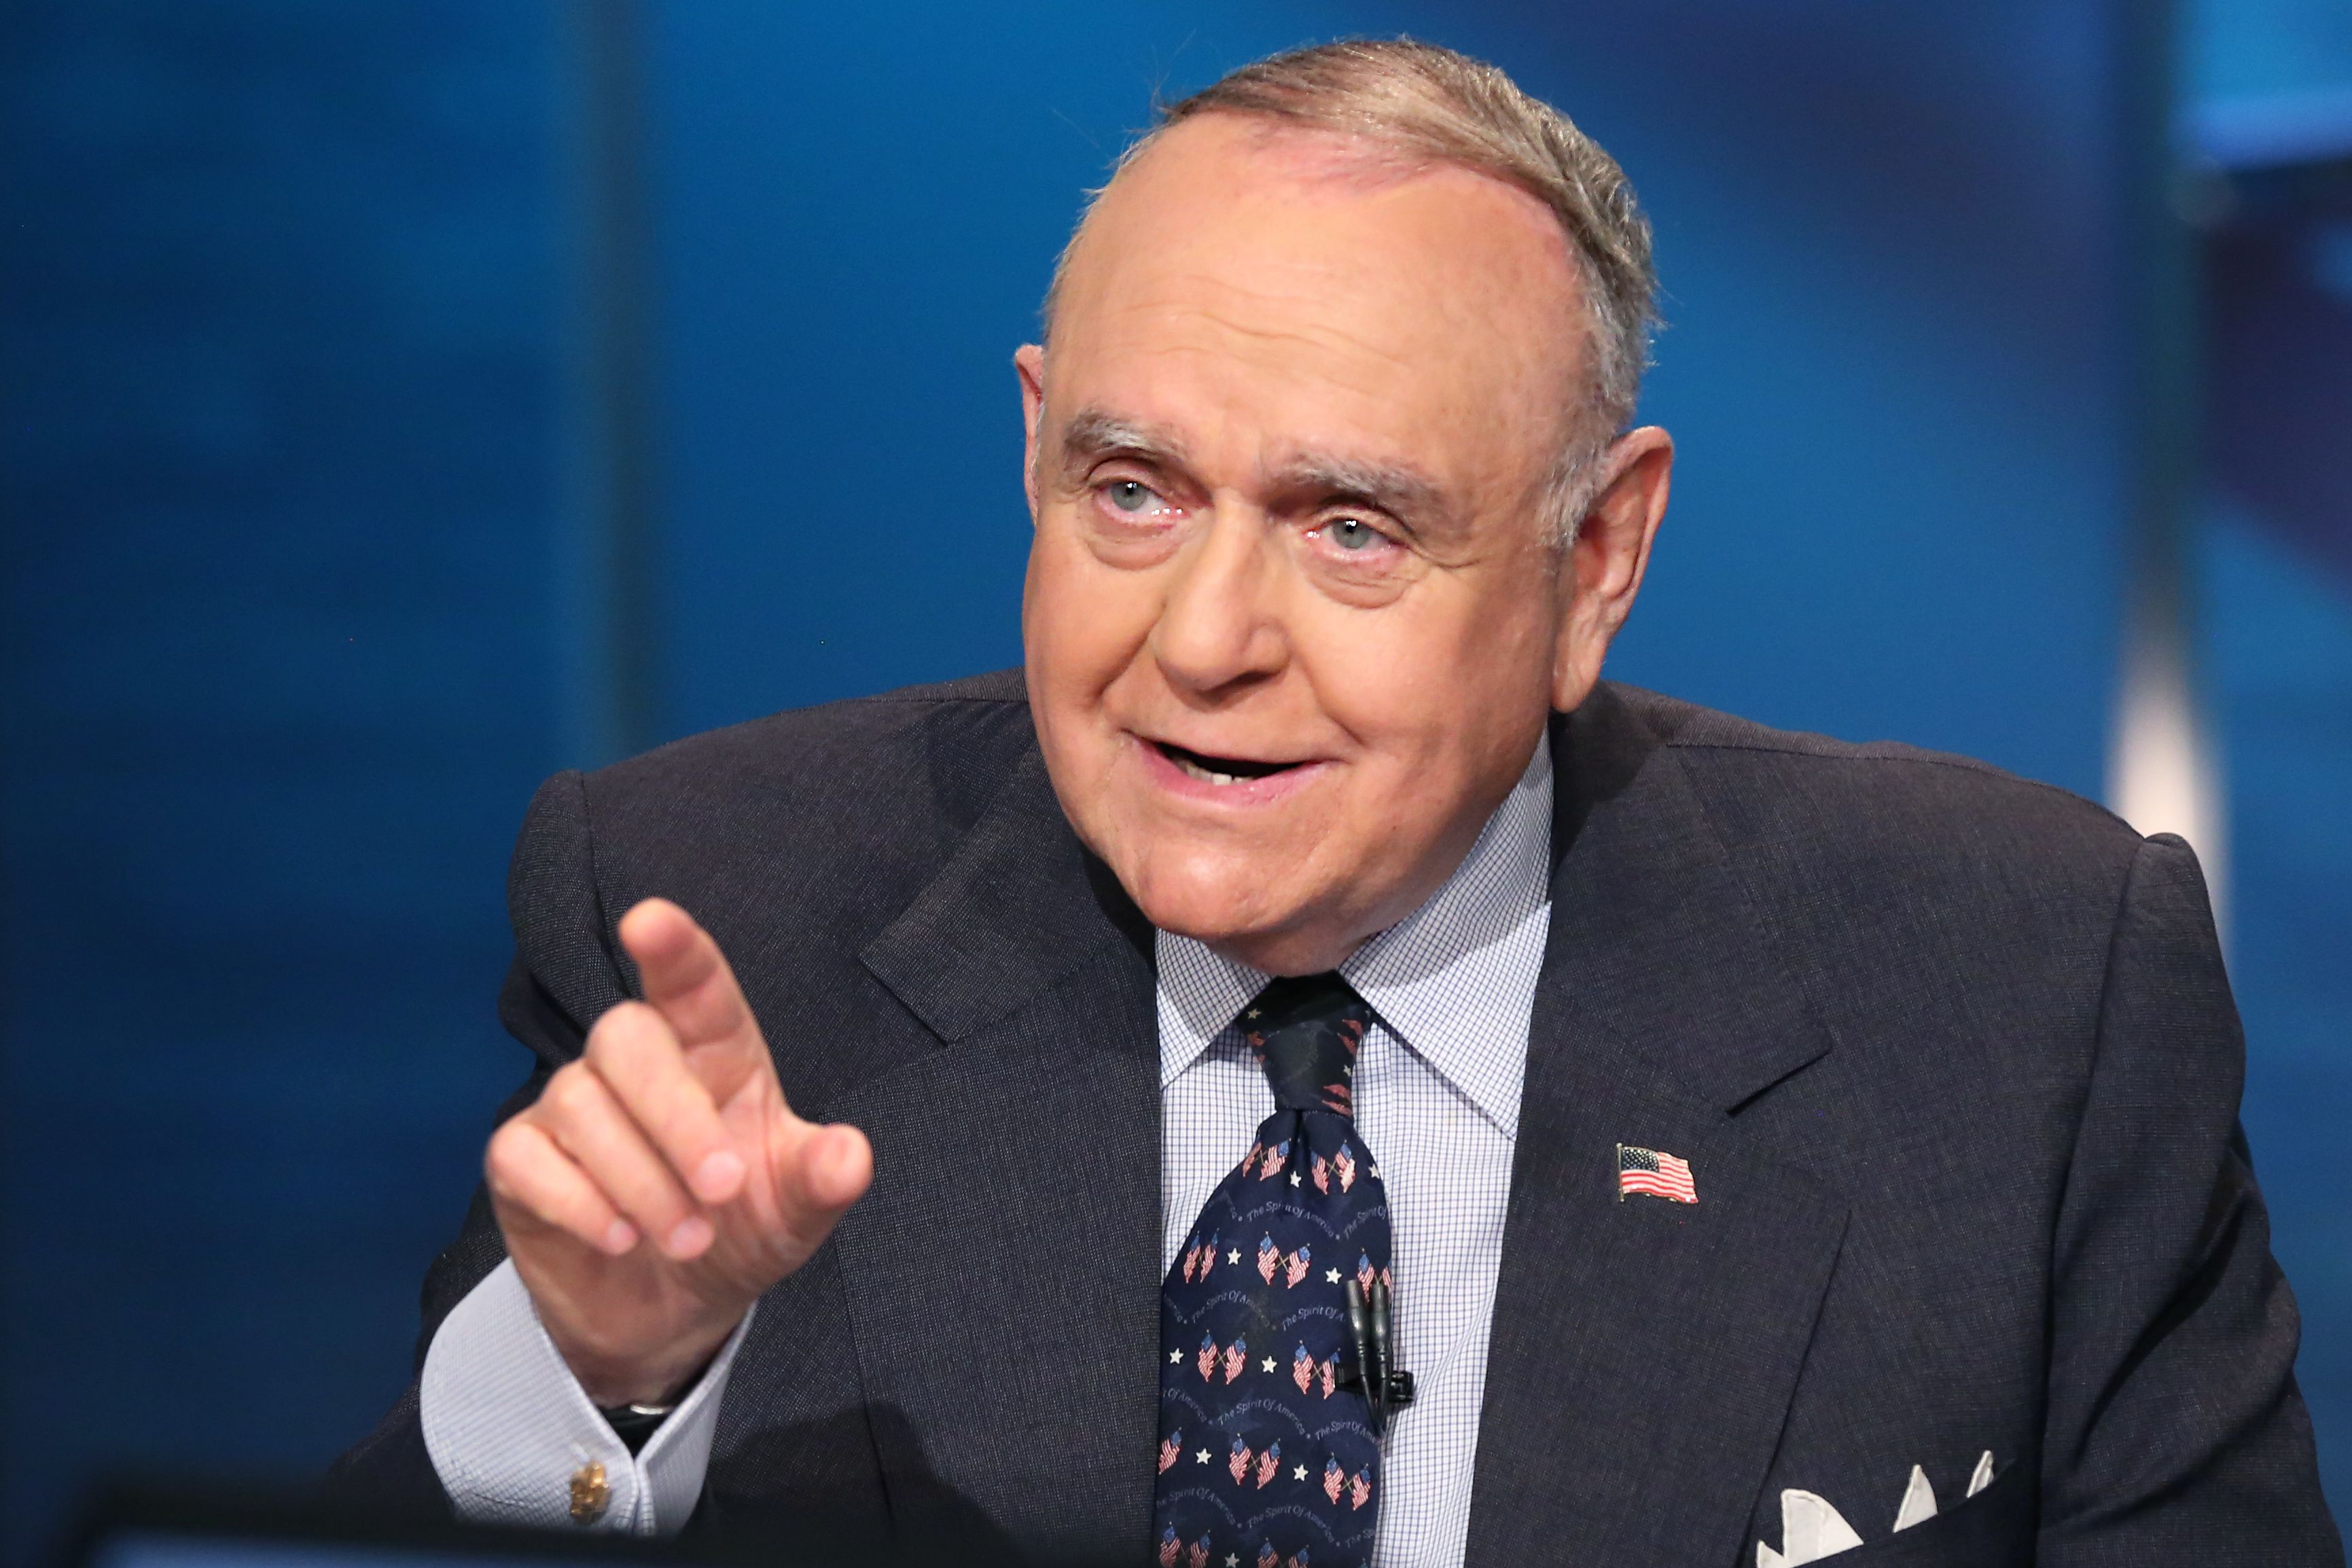 Leon Cooperman’s controversial feedback about Obama, Warren